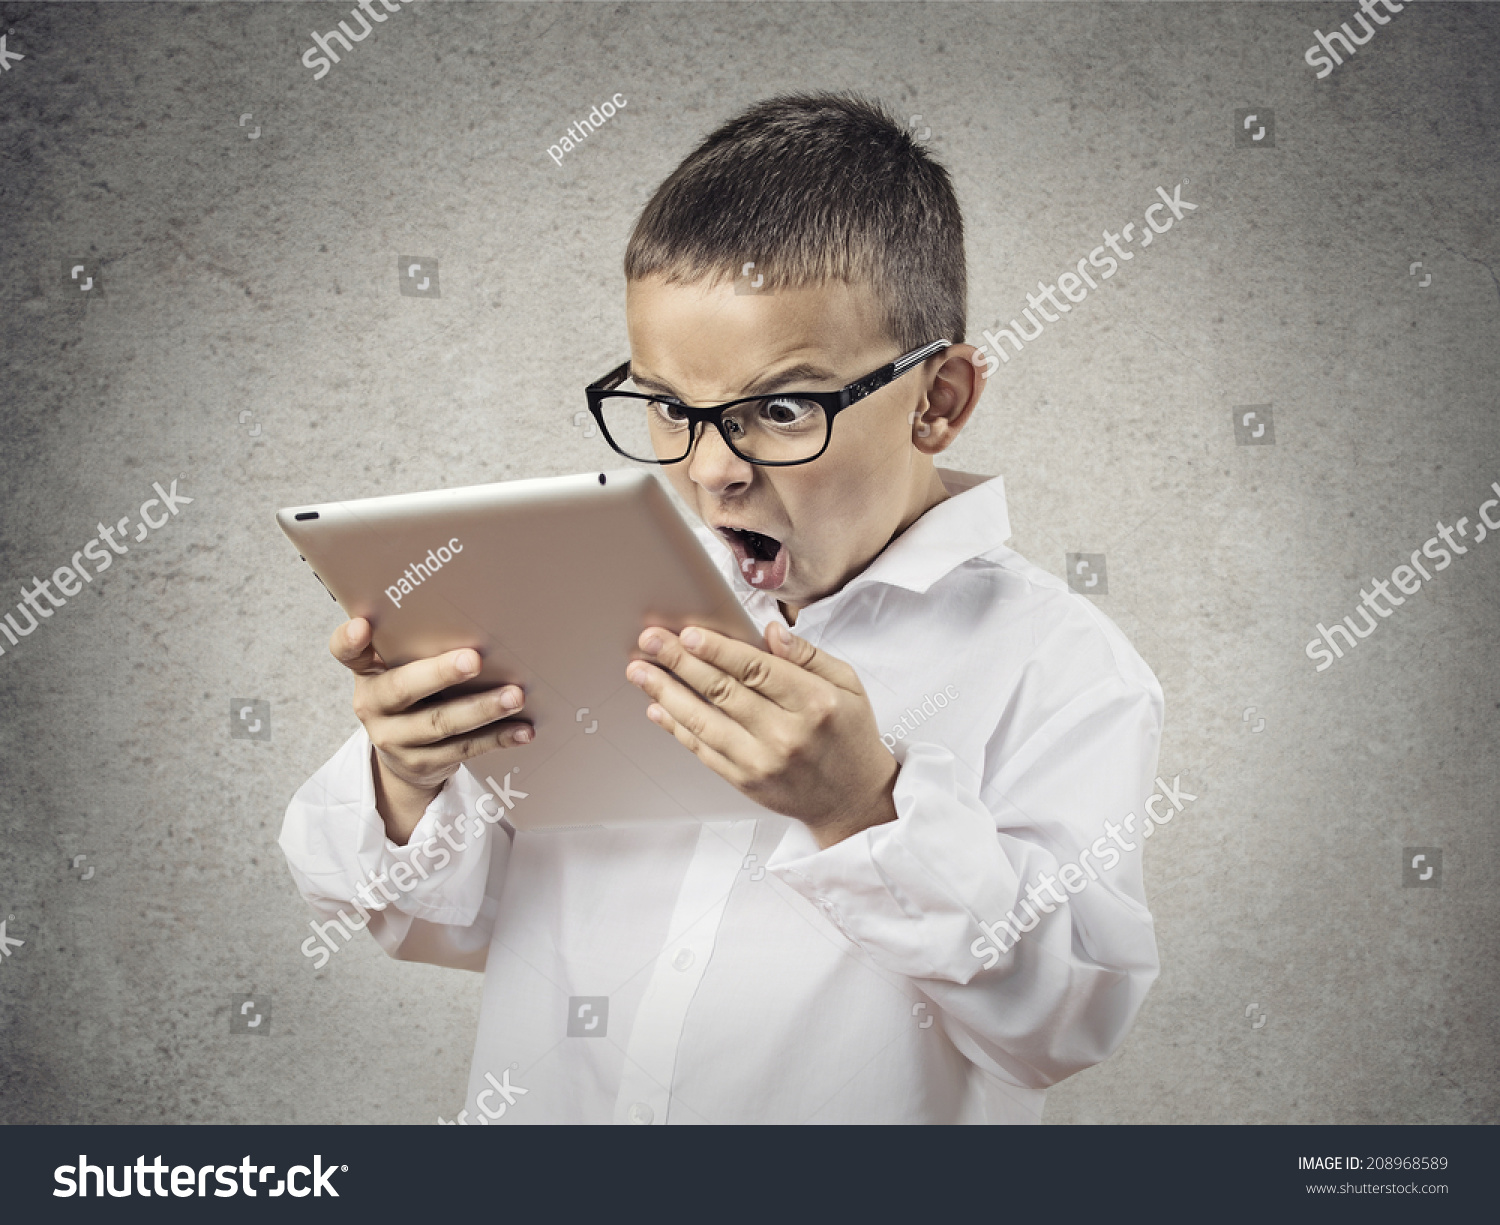 stock-photo-closeup-portrait-child-shocked-surprised-funny-looking-boy-with-glasses-using-holding-laptop-208968589.jpg